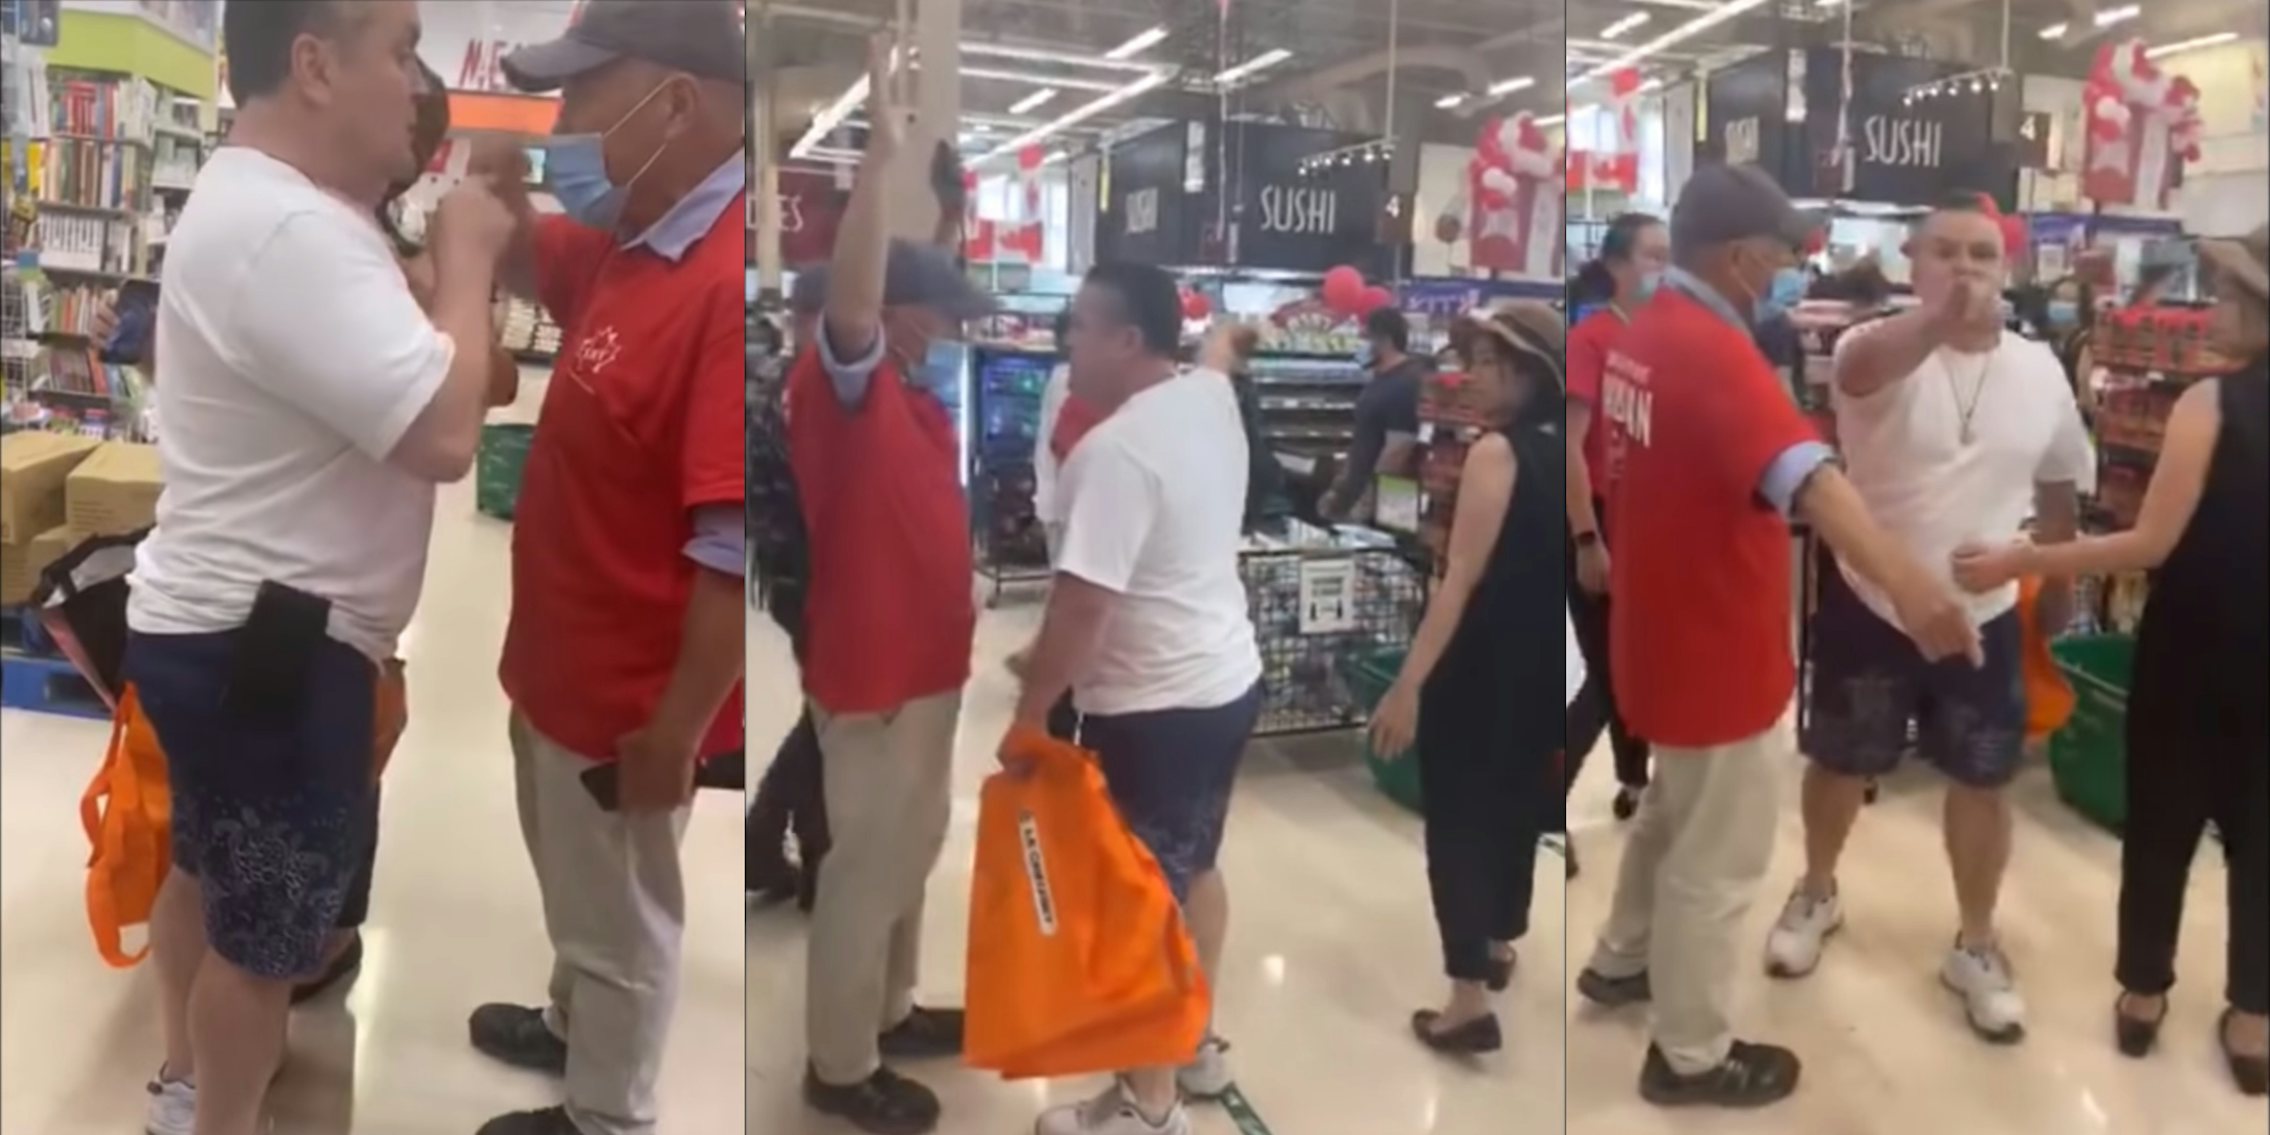 Ontario man yelling racist comments at T&T market after being asked to wear a mask